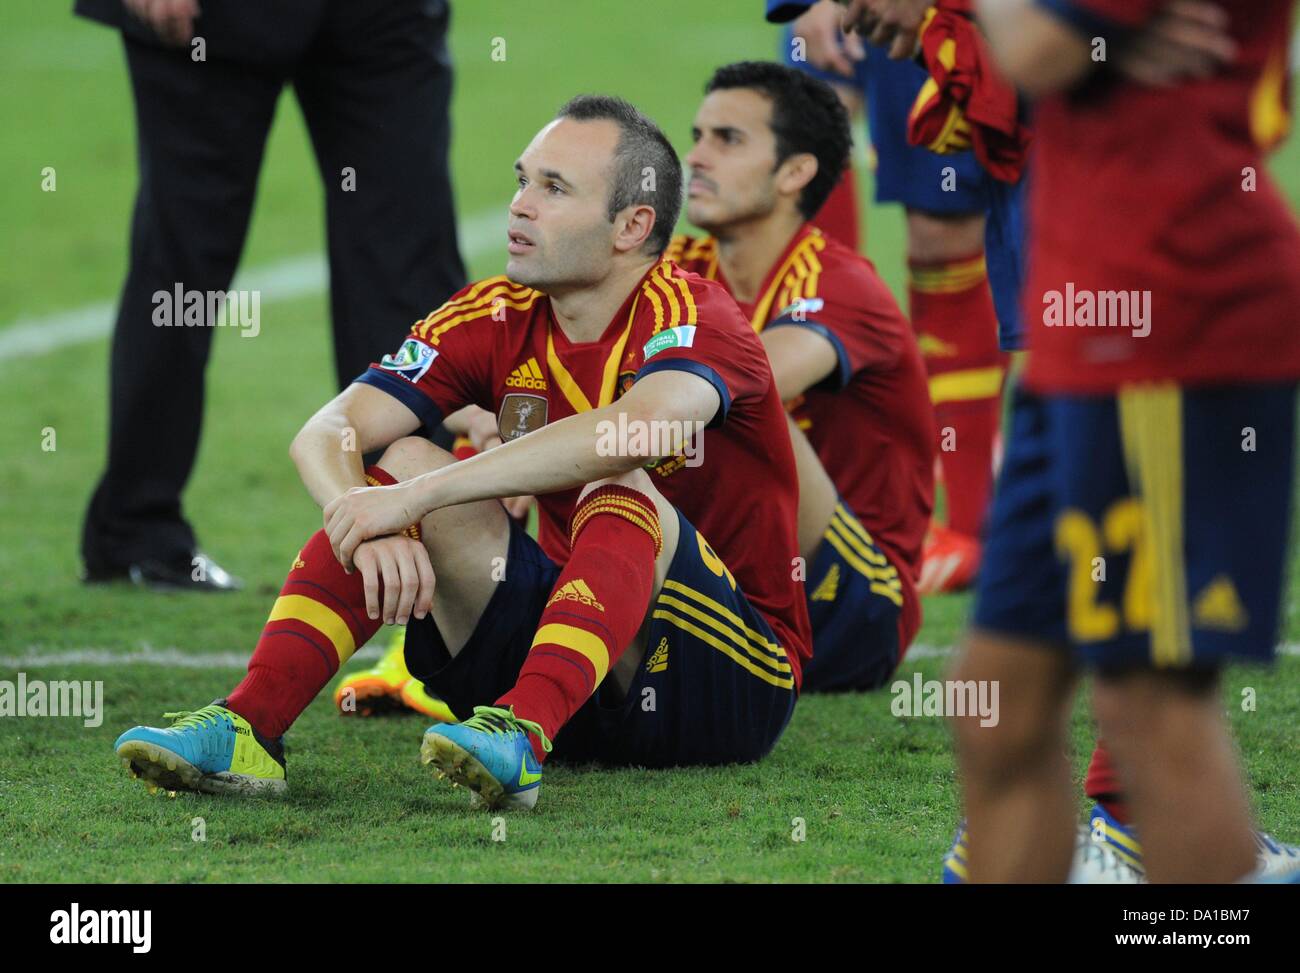 Rio de Janeiro, Brazil. 30 June 2013, Confederations Cup final, Brazil v Spain 3-0: Spain's Andres Iniesta disappointed. Credit:  dpa picture alliance/Alamy Live News Stock Photo